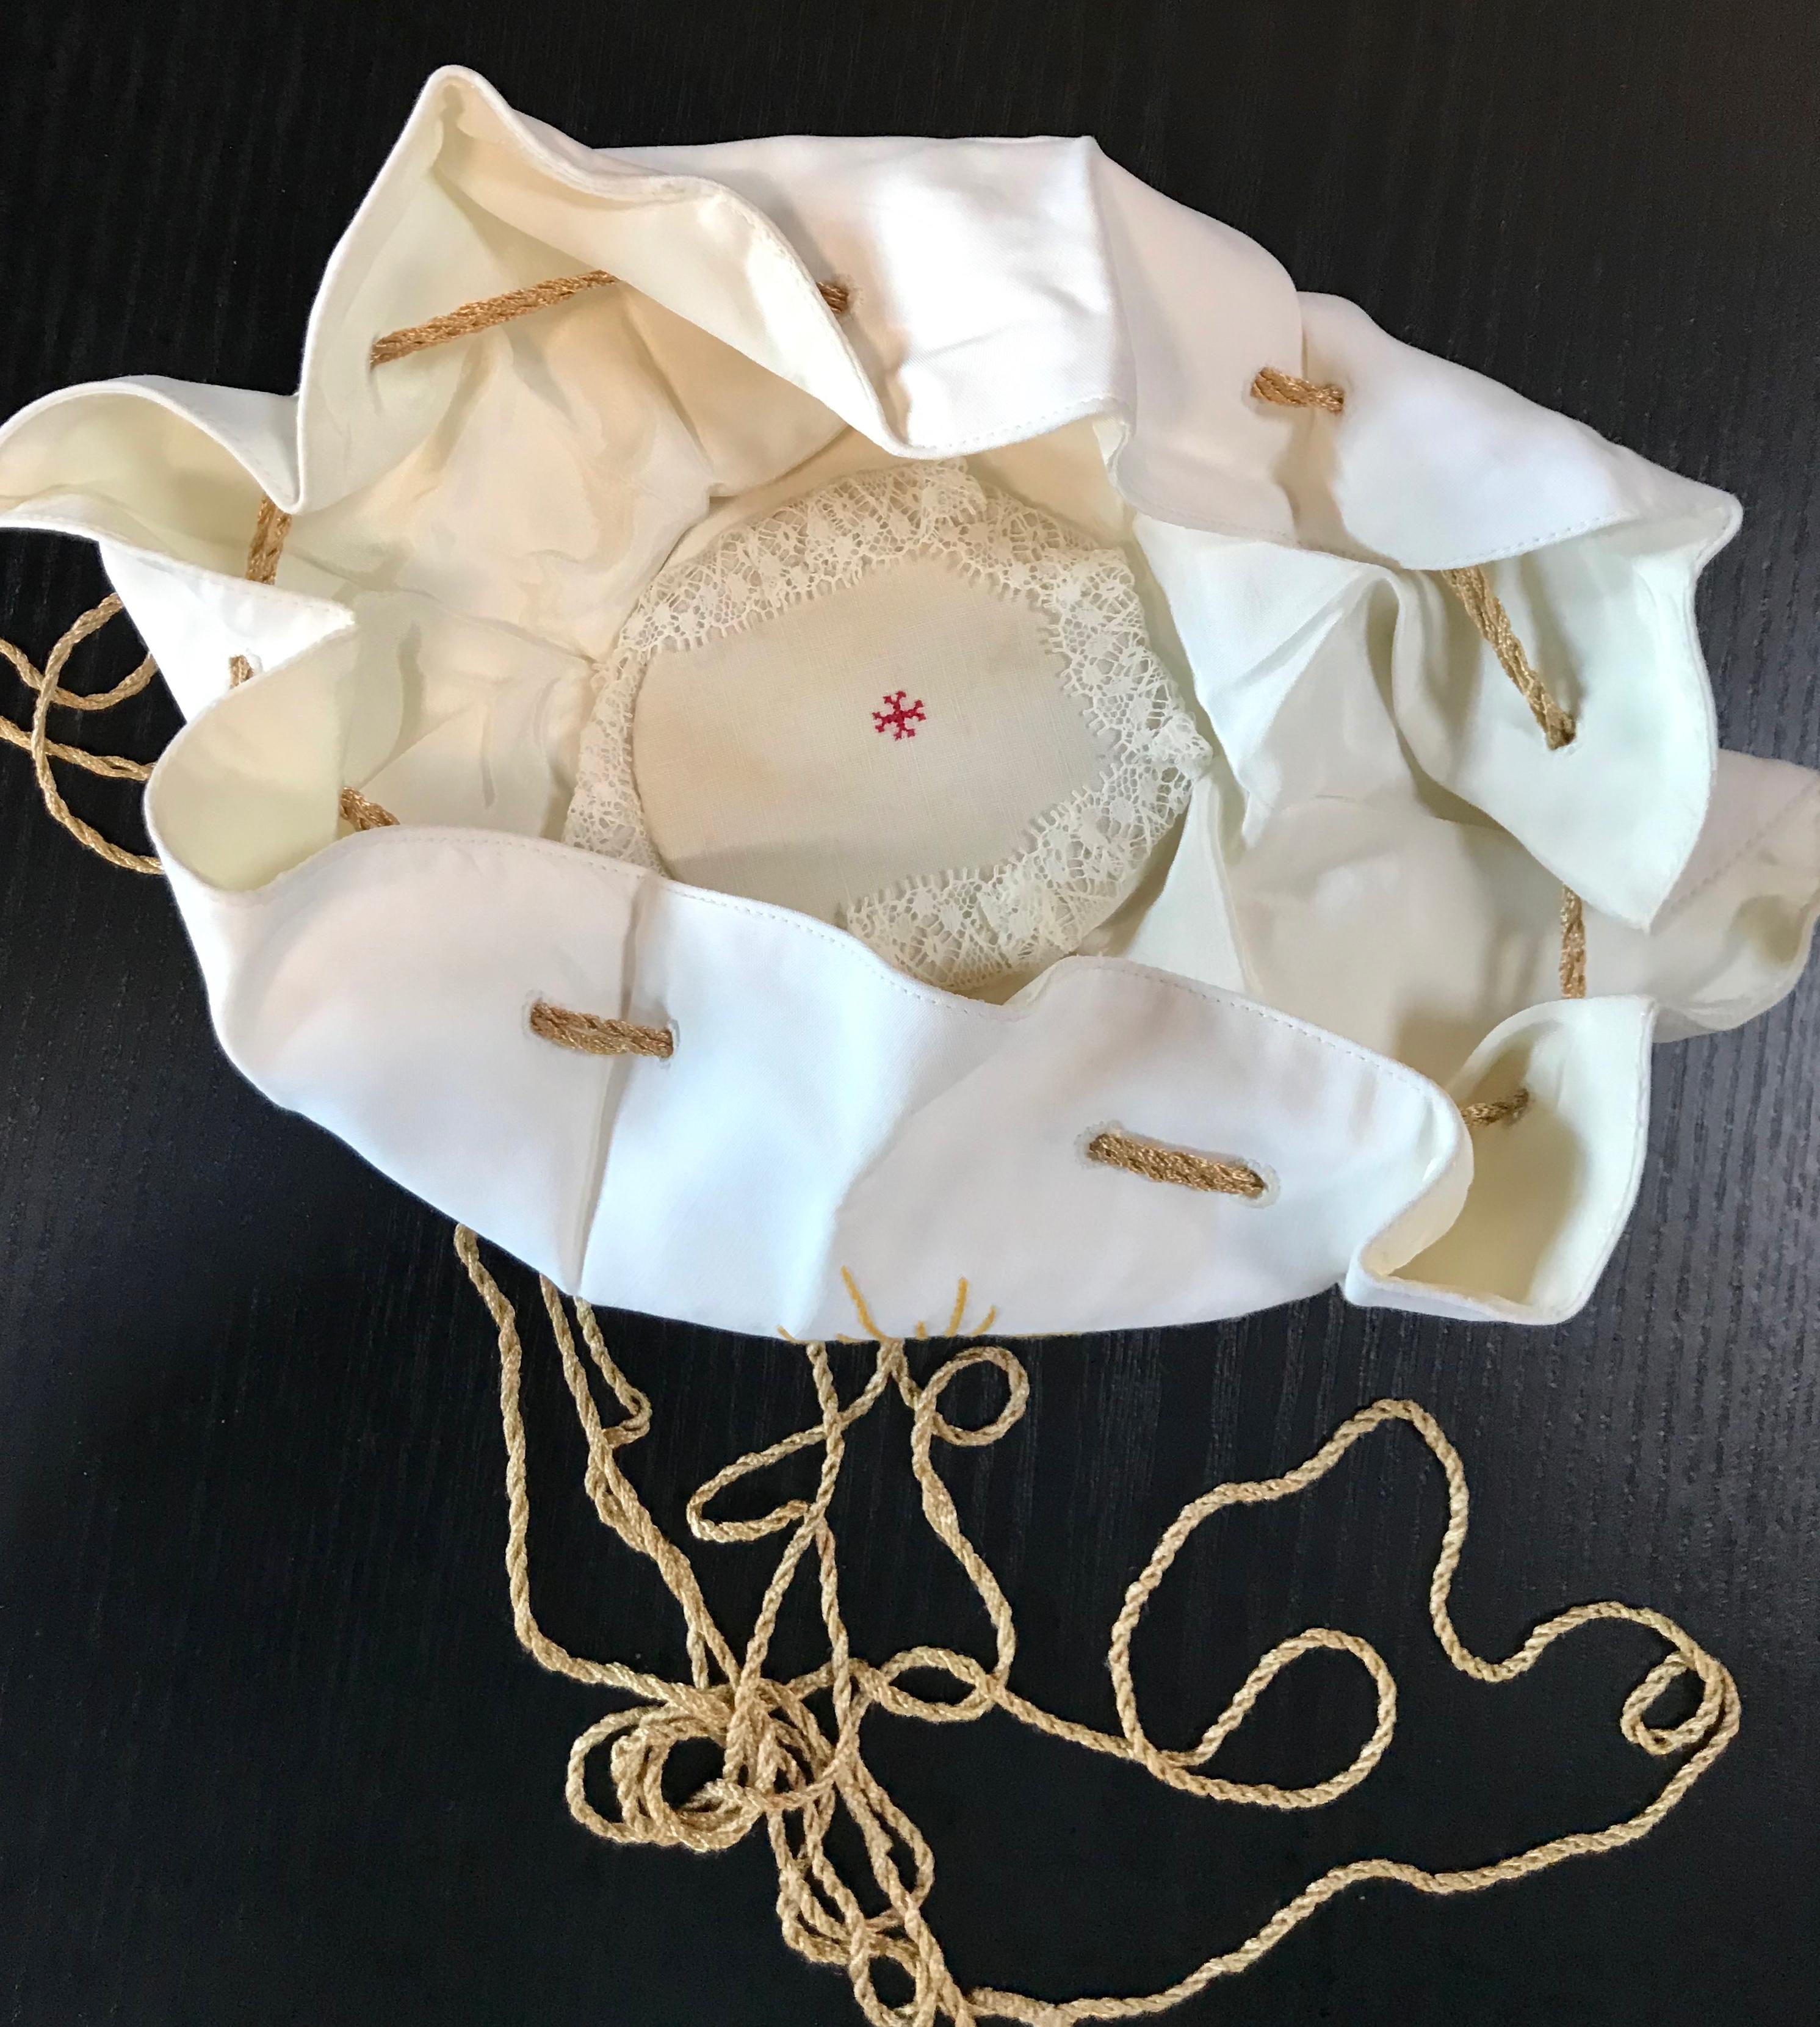 This hand embroidered linen bag was used to carry the communion Host wafers to the older or sick that could not come to the Church to receive communion. The Host was wrapped in a corporal in this small burse linen bag which was suspended round the